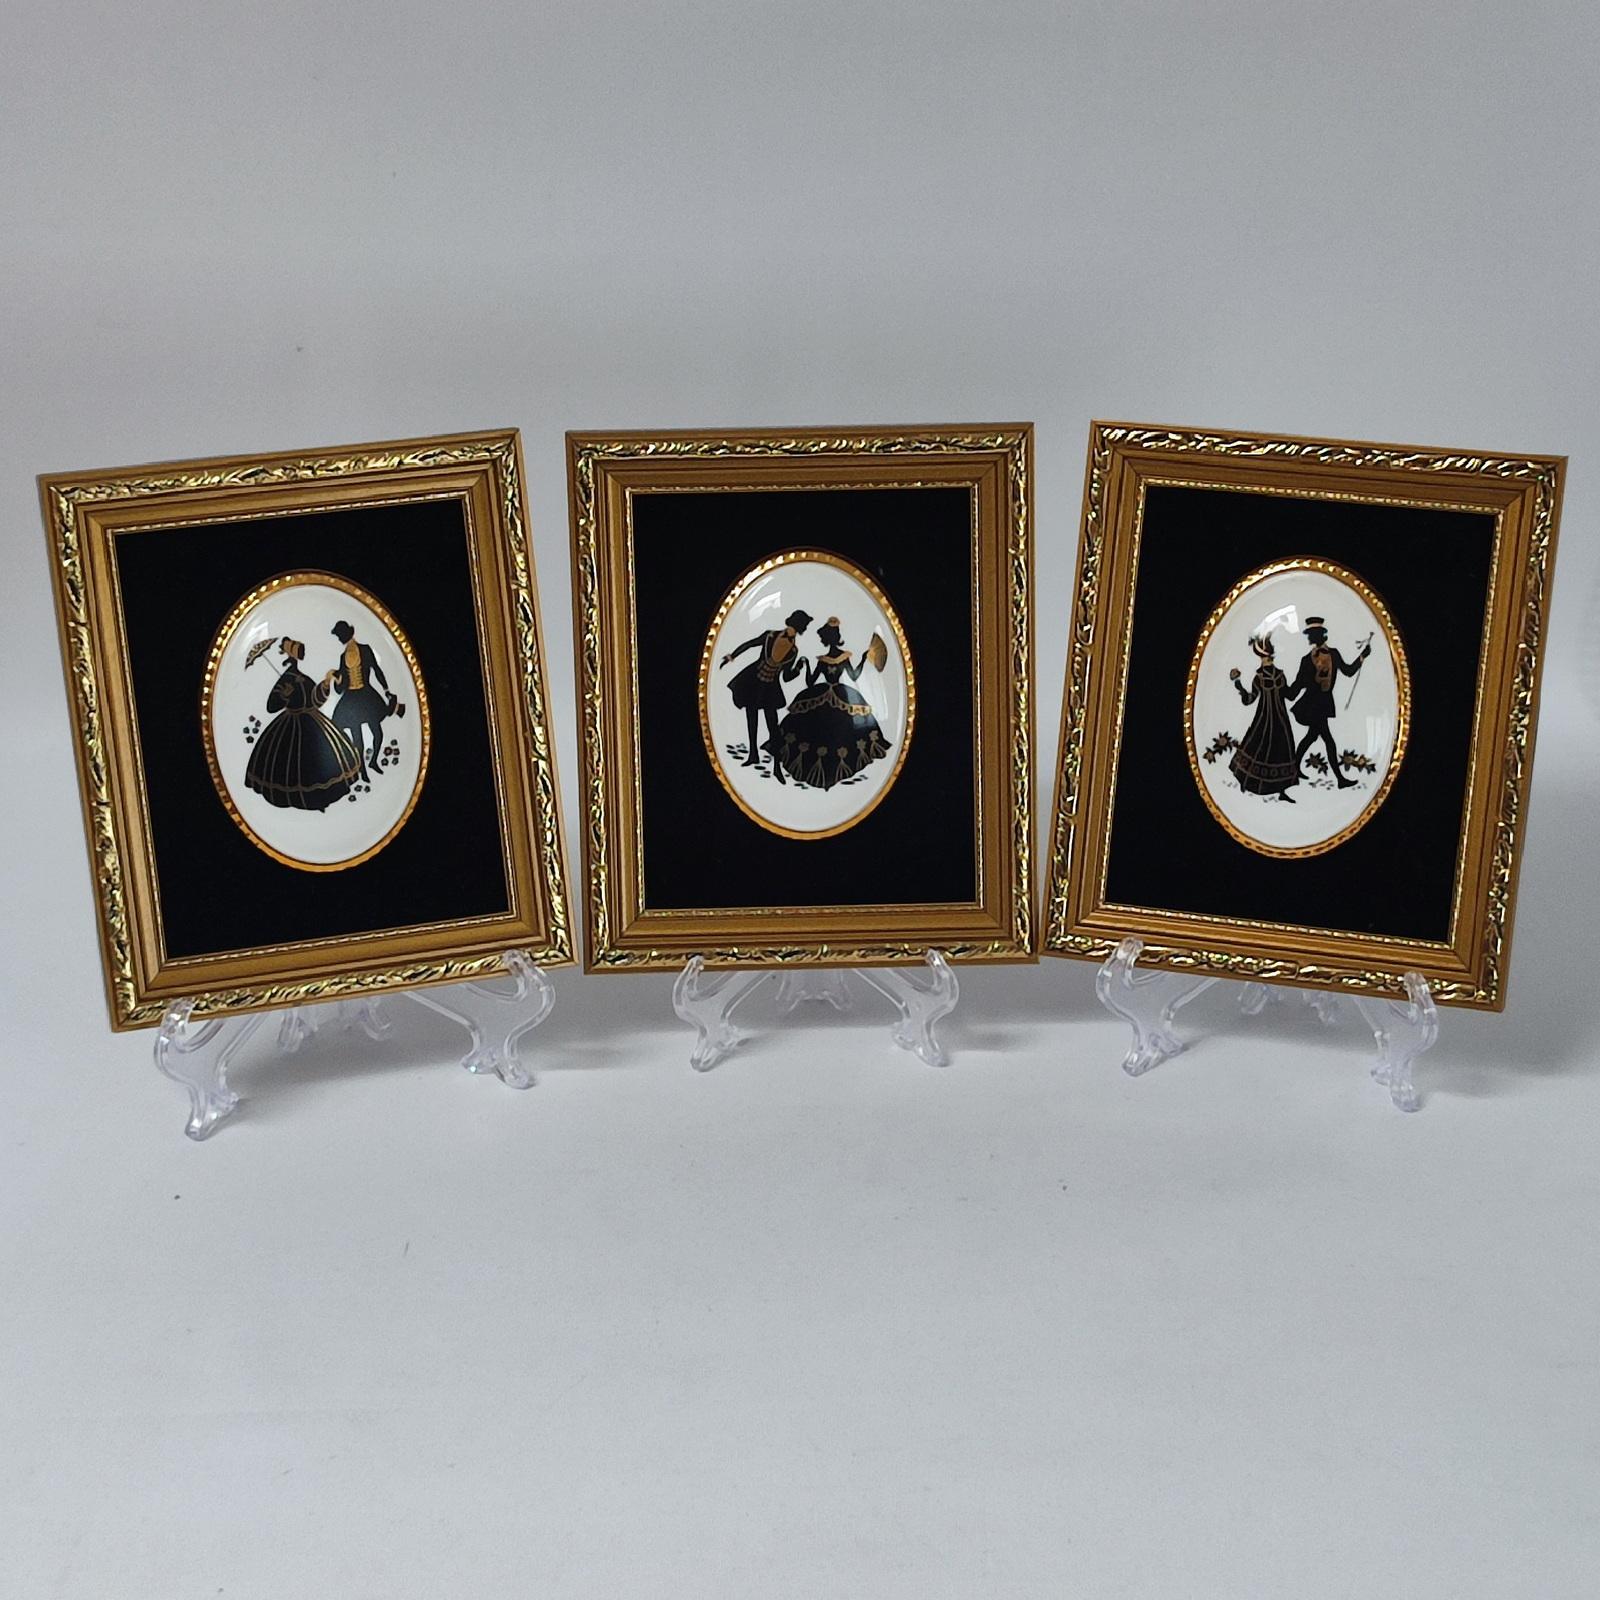 Set of 3 Staffordshire silhouette images framed on porcelain medallions (black gold), with black velvet background.
These beautiful Fine Bone China Frame Wall Art Silhouettes add a touch of romance to your home. The intricate Rococo design features